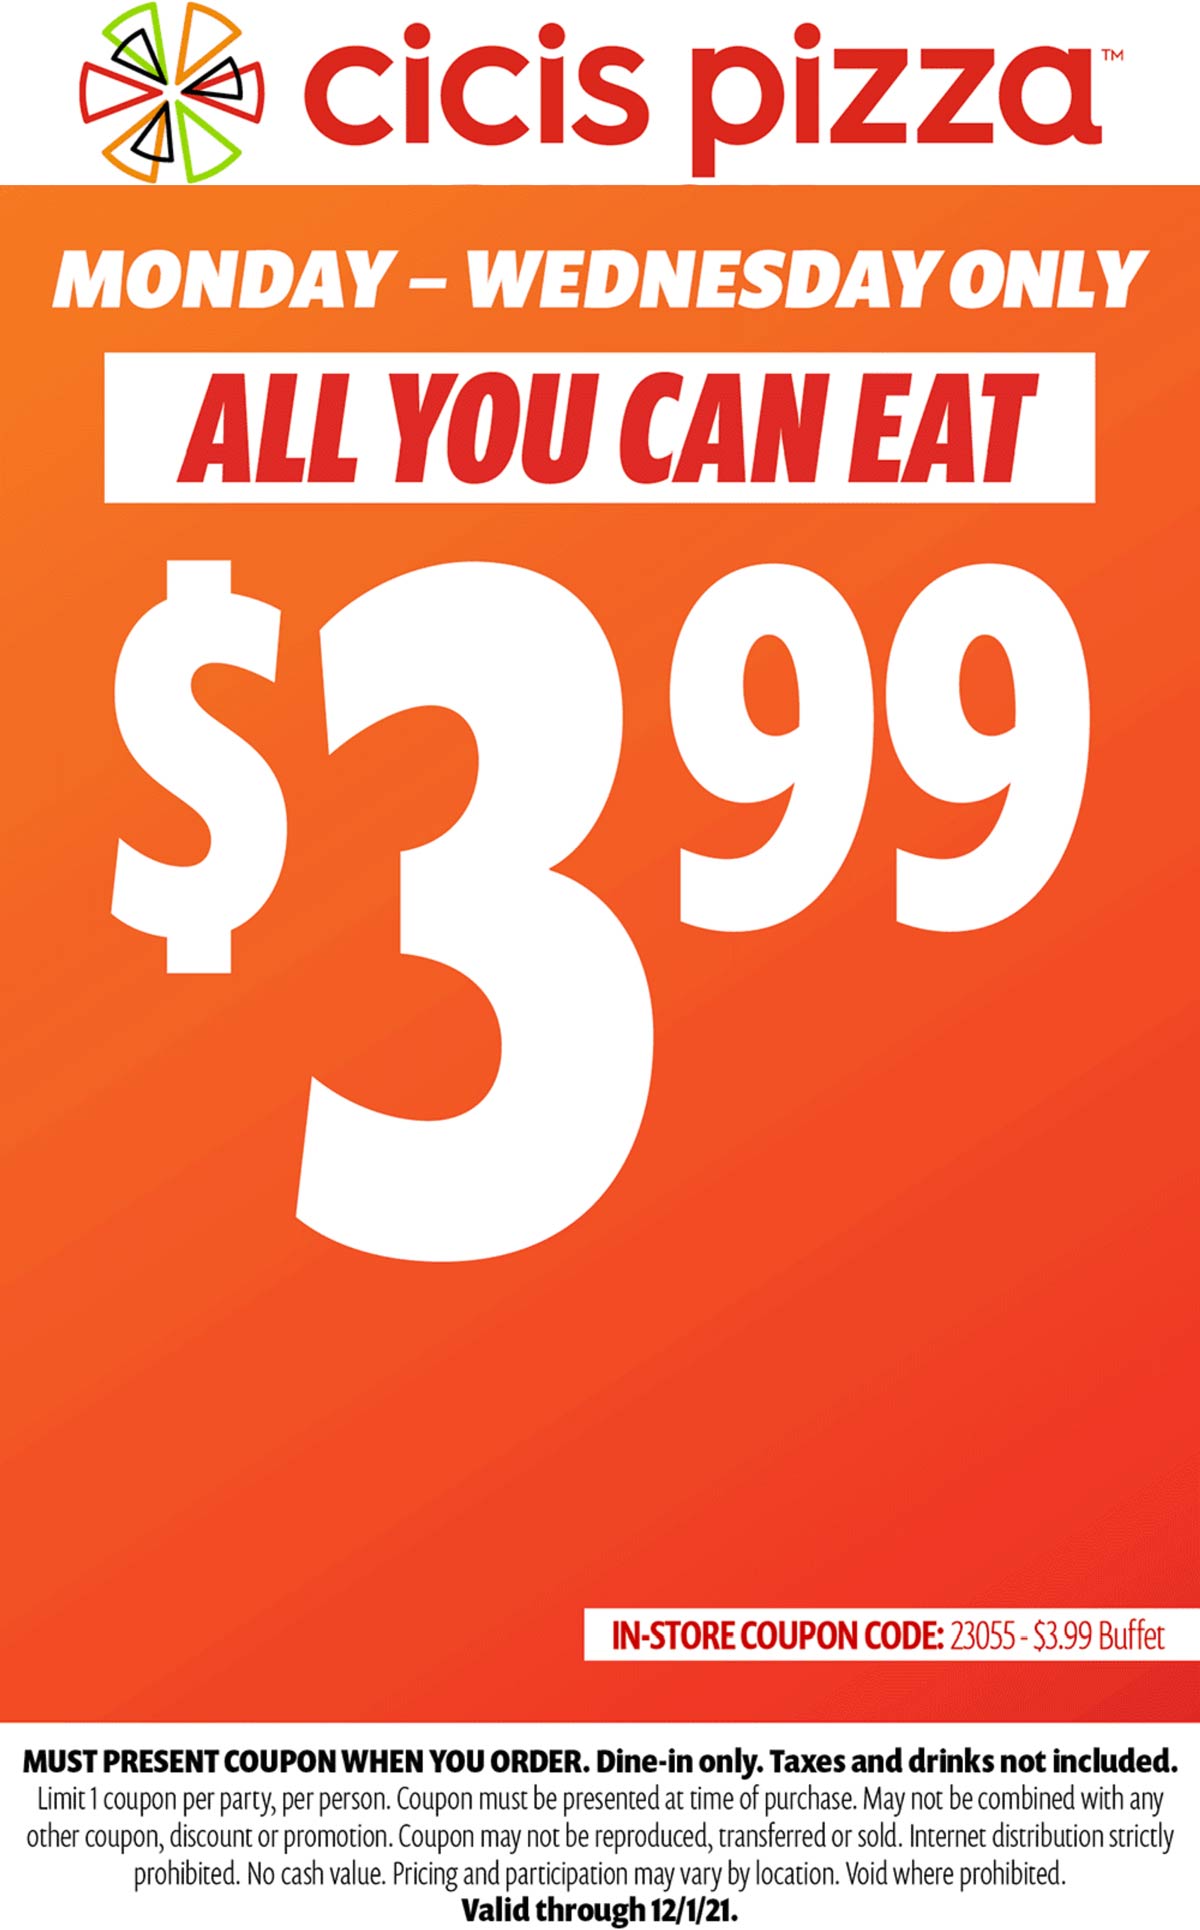 Cicis Pizza restaurants Coupon  $4 all you can eat Mon-Wed at Cicis Pizza #cicispizza 